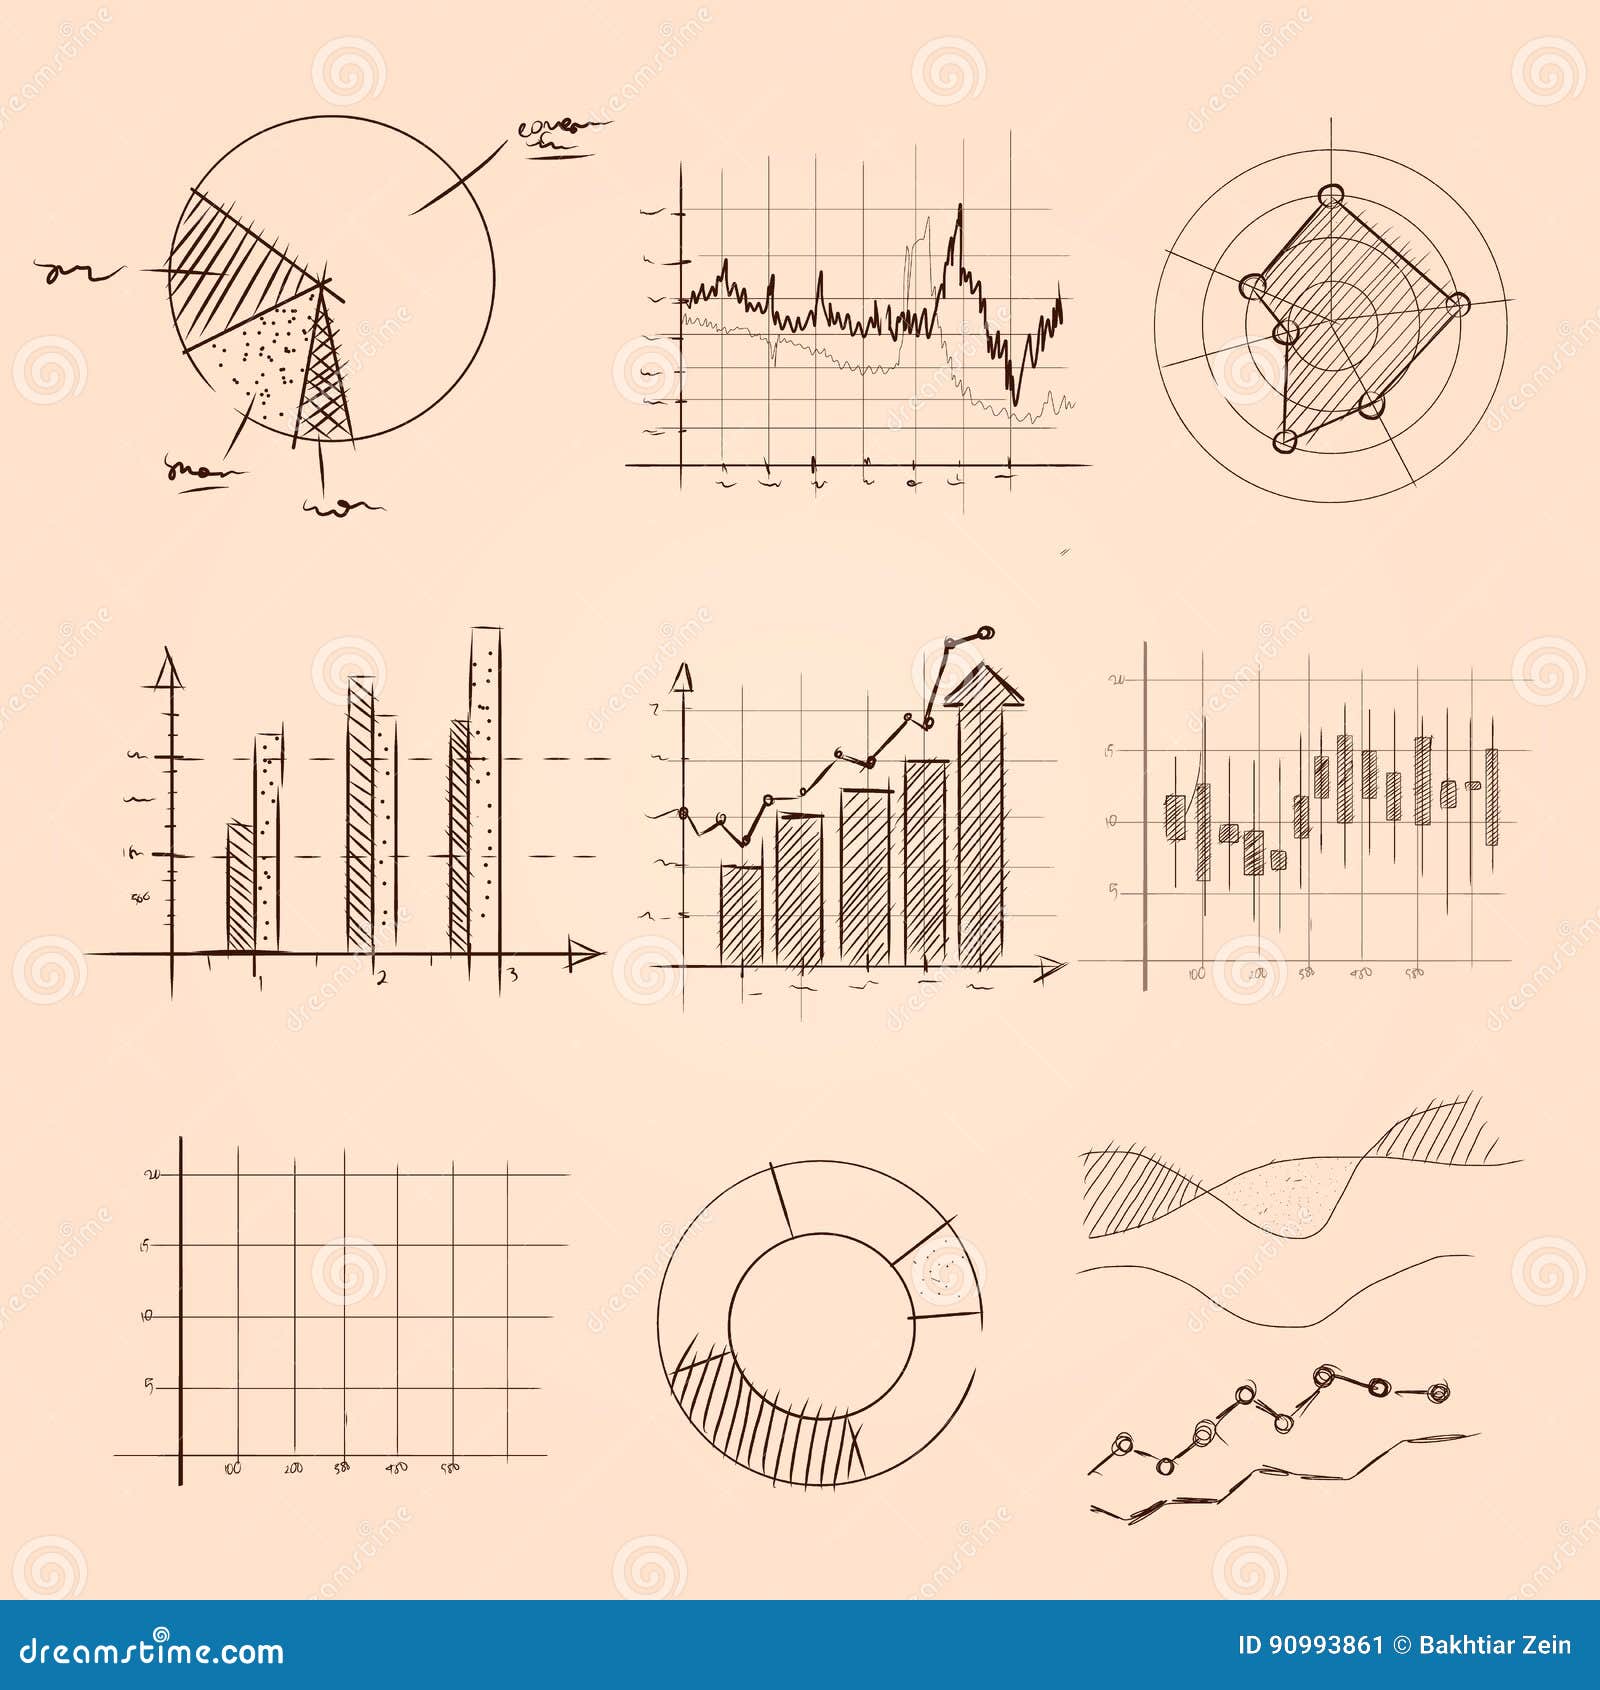 Line graphic of business stats sketch - Free business icons